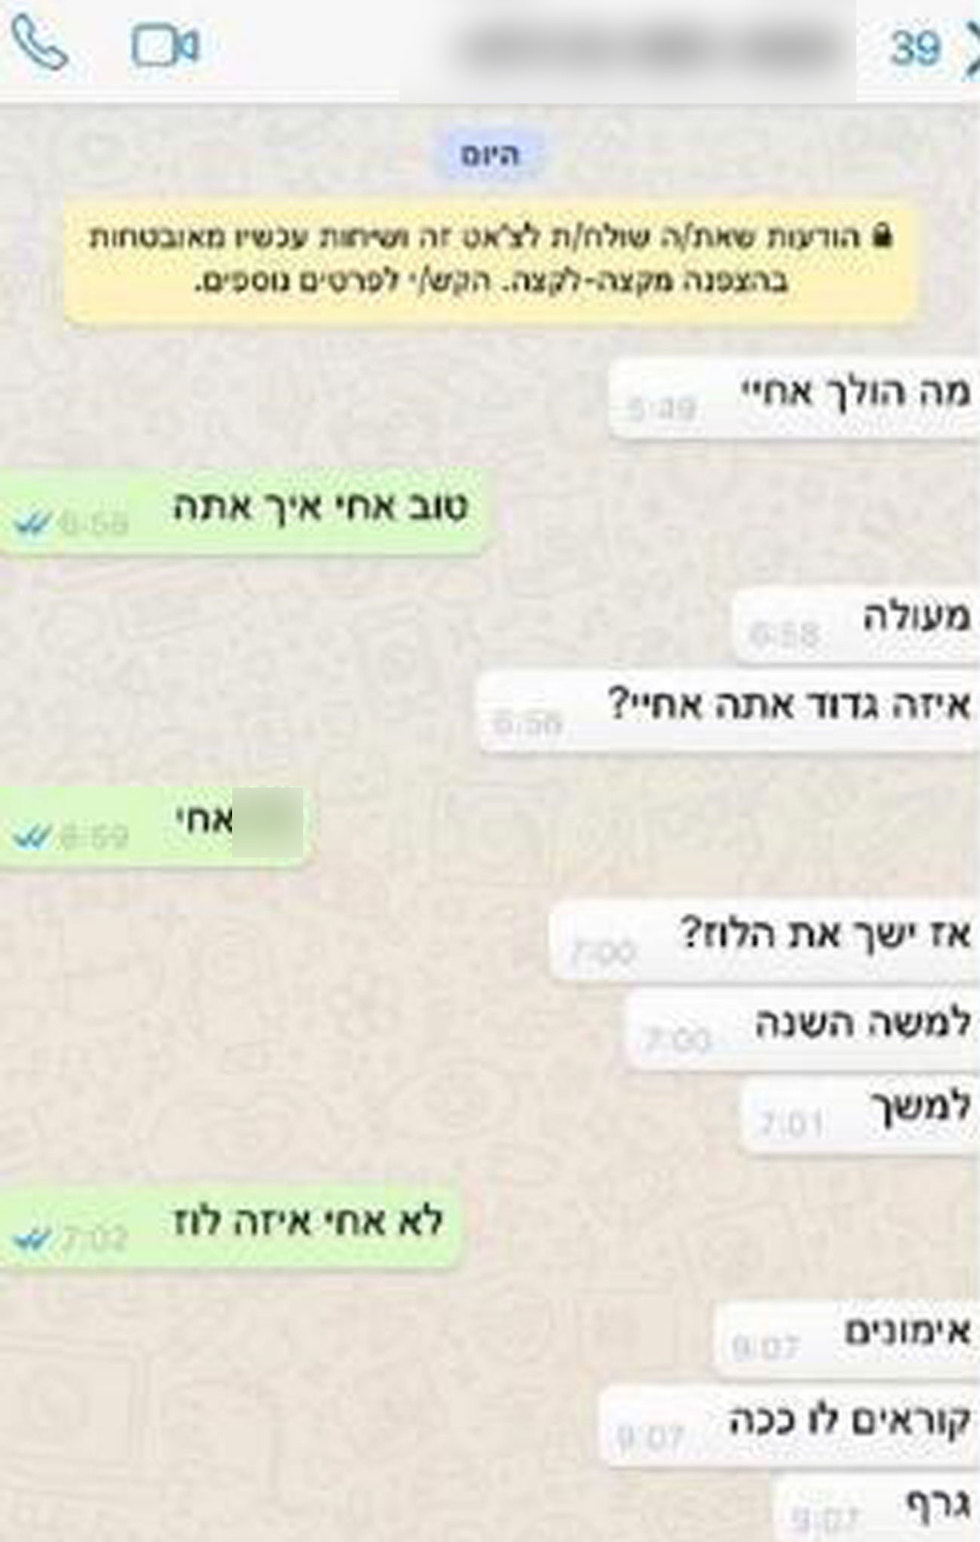 Hamas contacting IDF soldiers fishing for intelligence